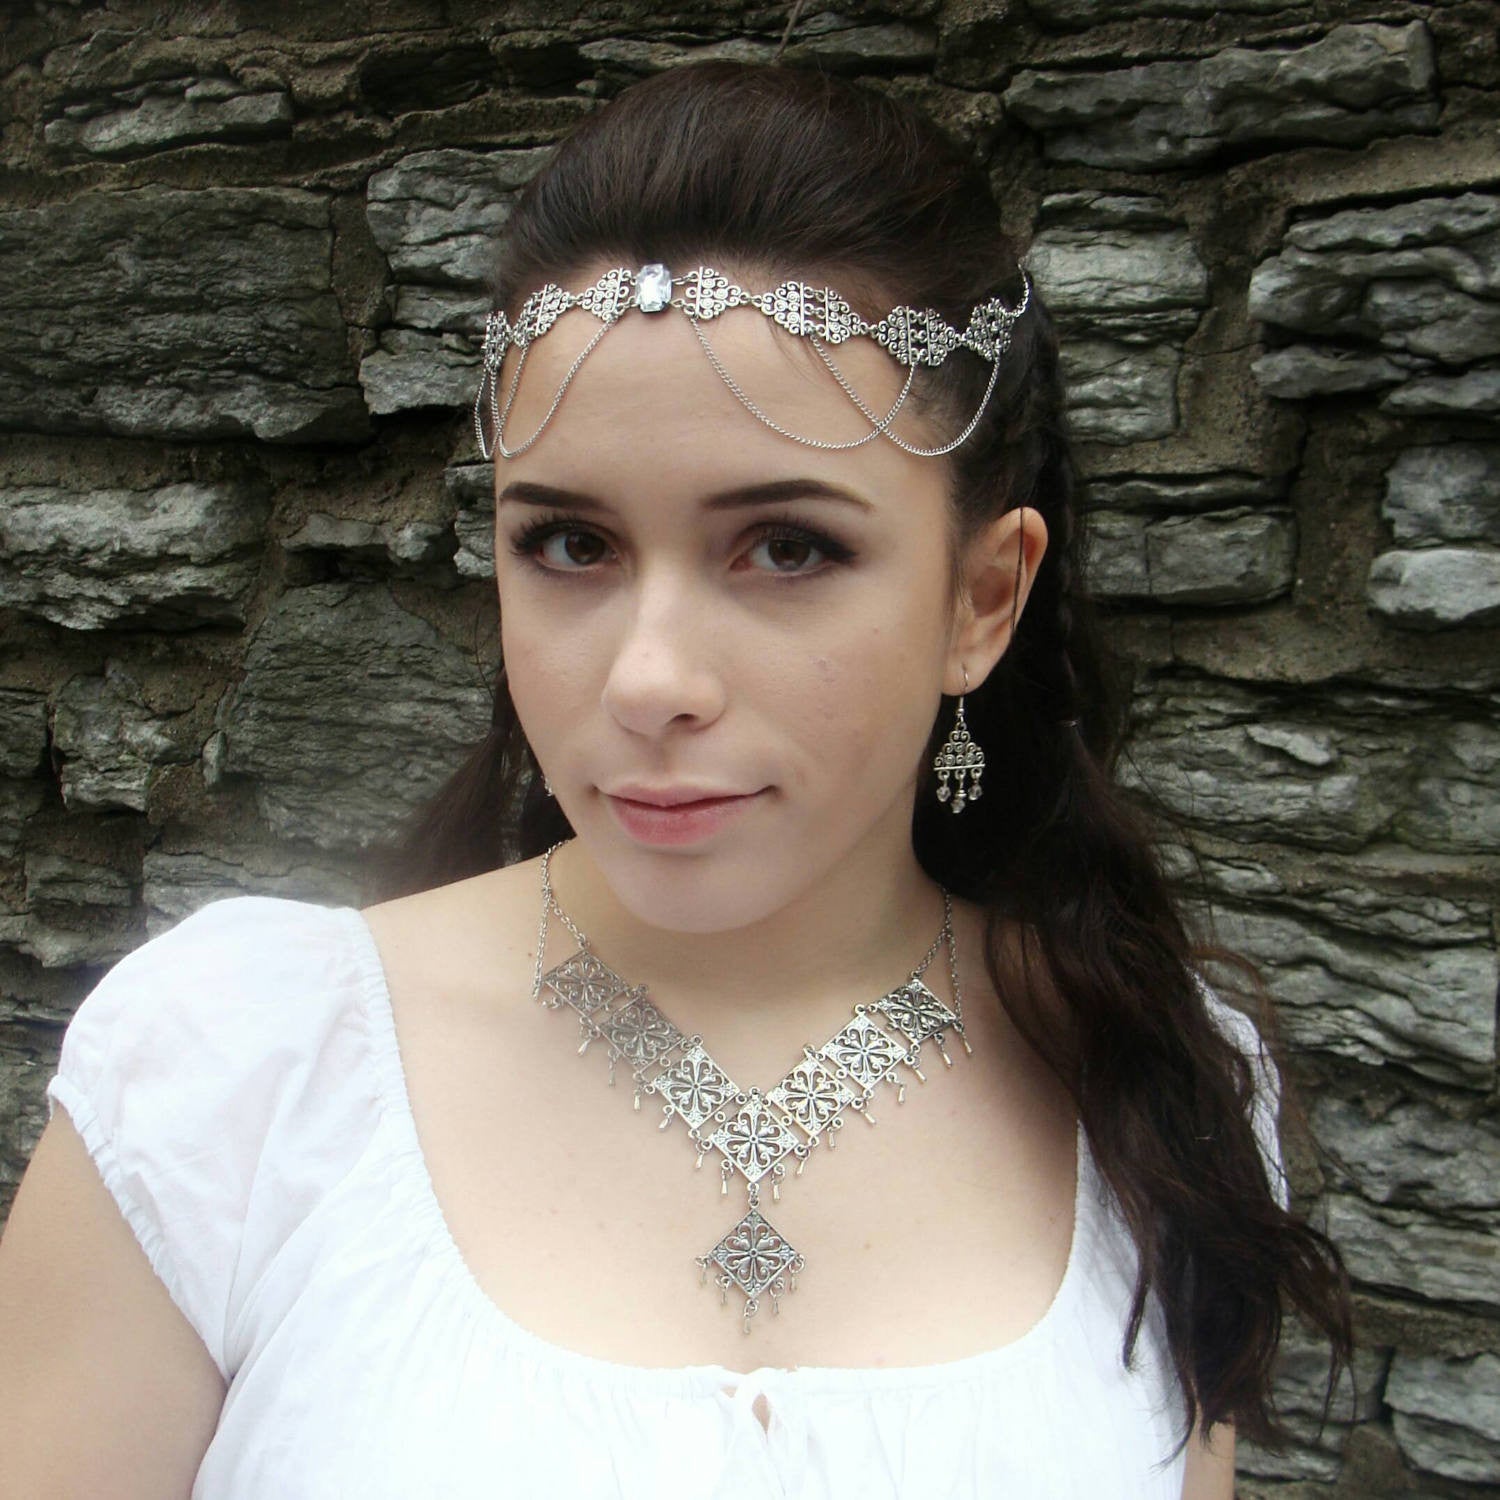 Gothic Necklace - Ren Faire - Bridesmaid Jewelry - Gothic Victorian - Silver Bridal Jewelry - Princess Cosplay - Silver Statement Necklace - DRAVYNMOOR